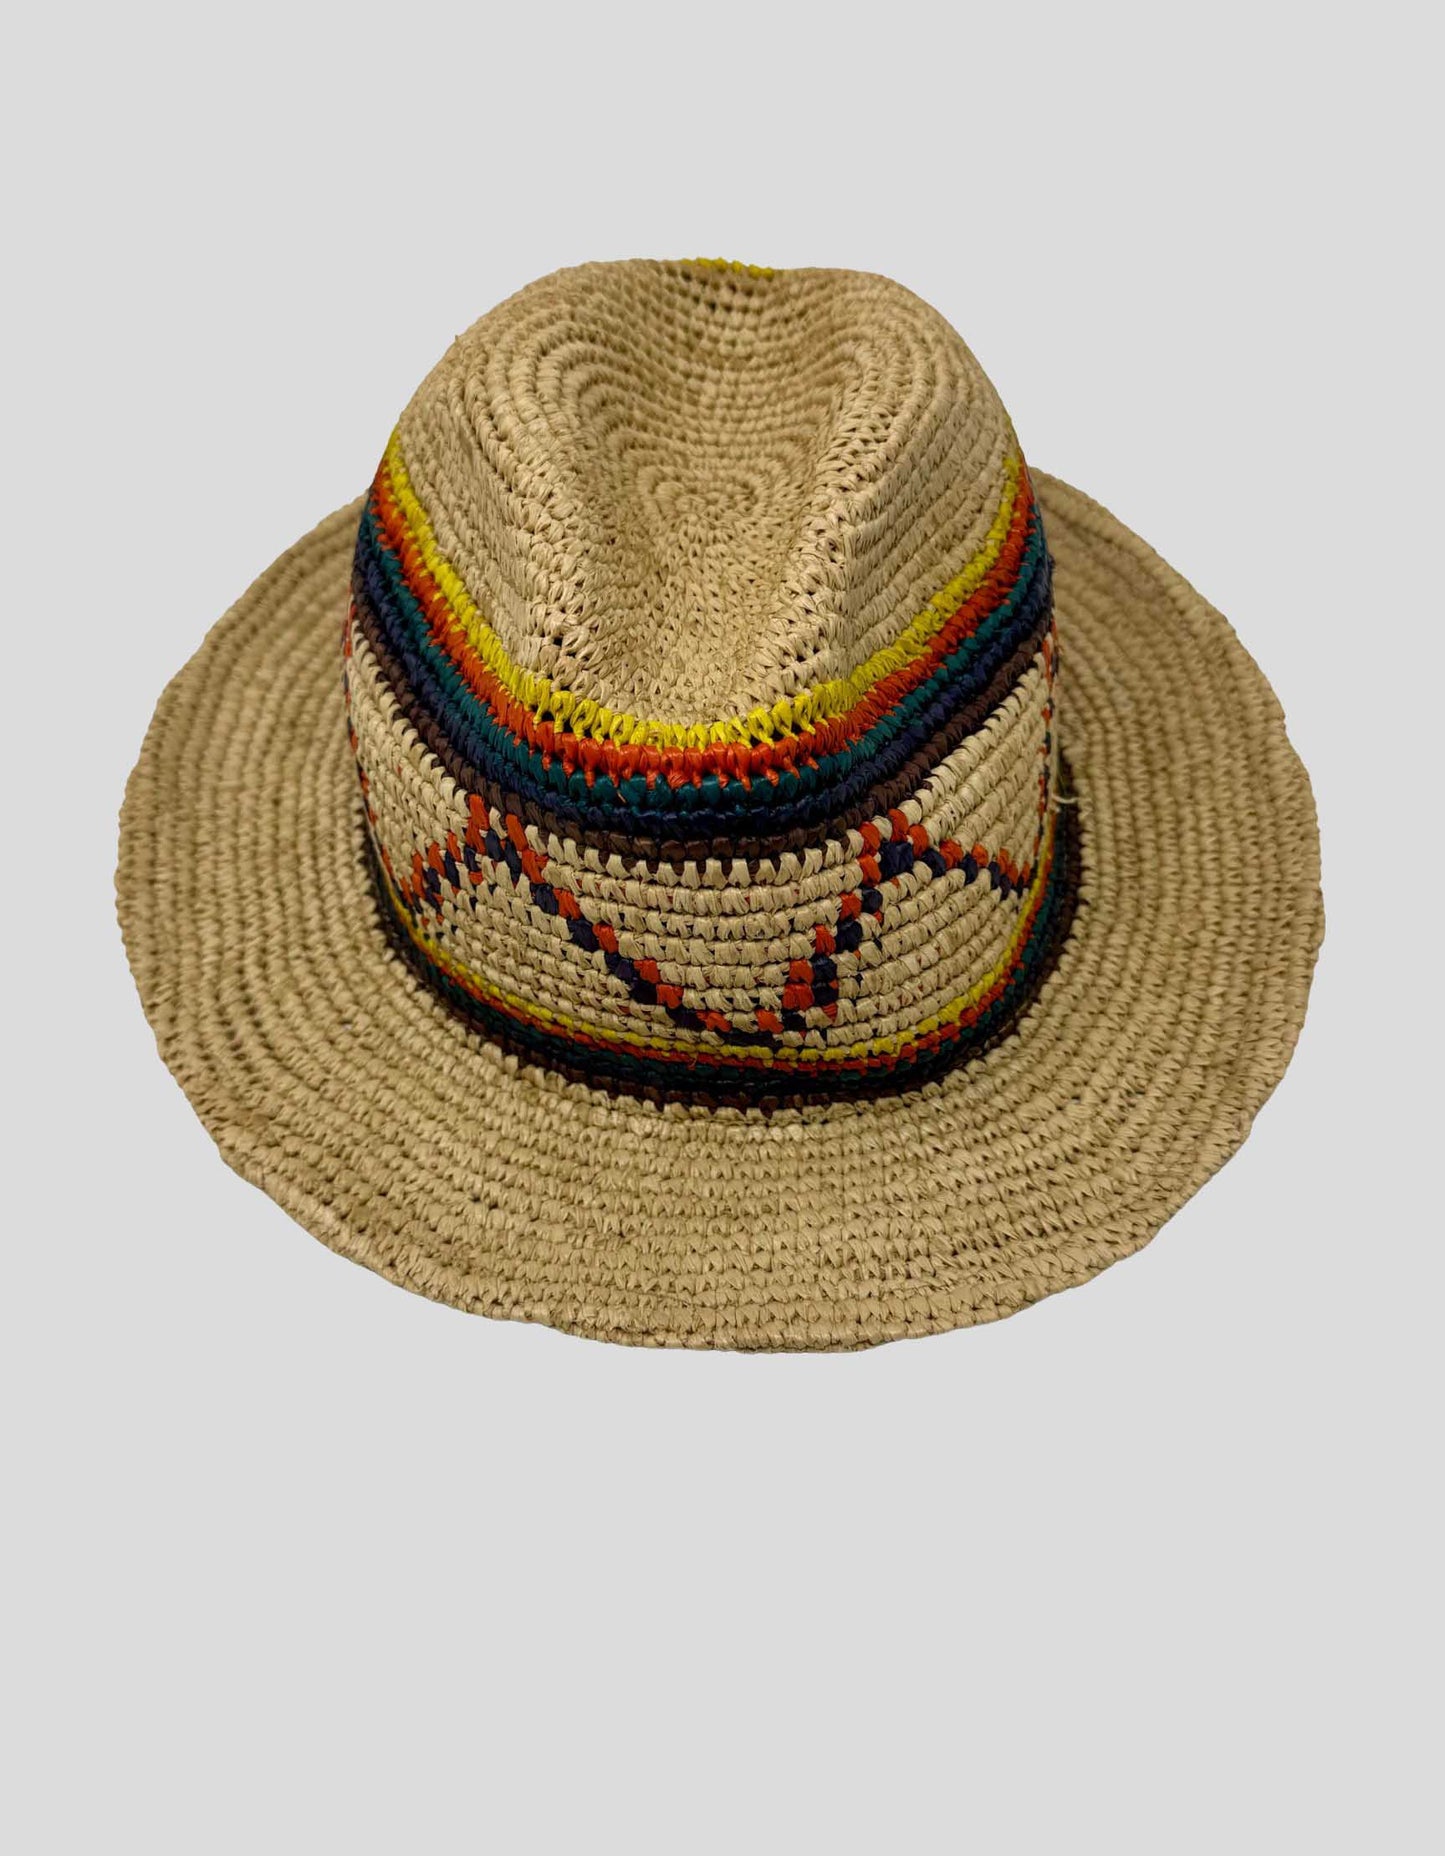 PAUL SMITH Mainline Crotcheted Straw Trilby Hat - Large